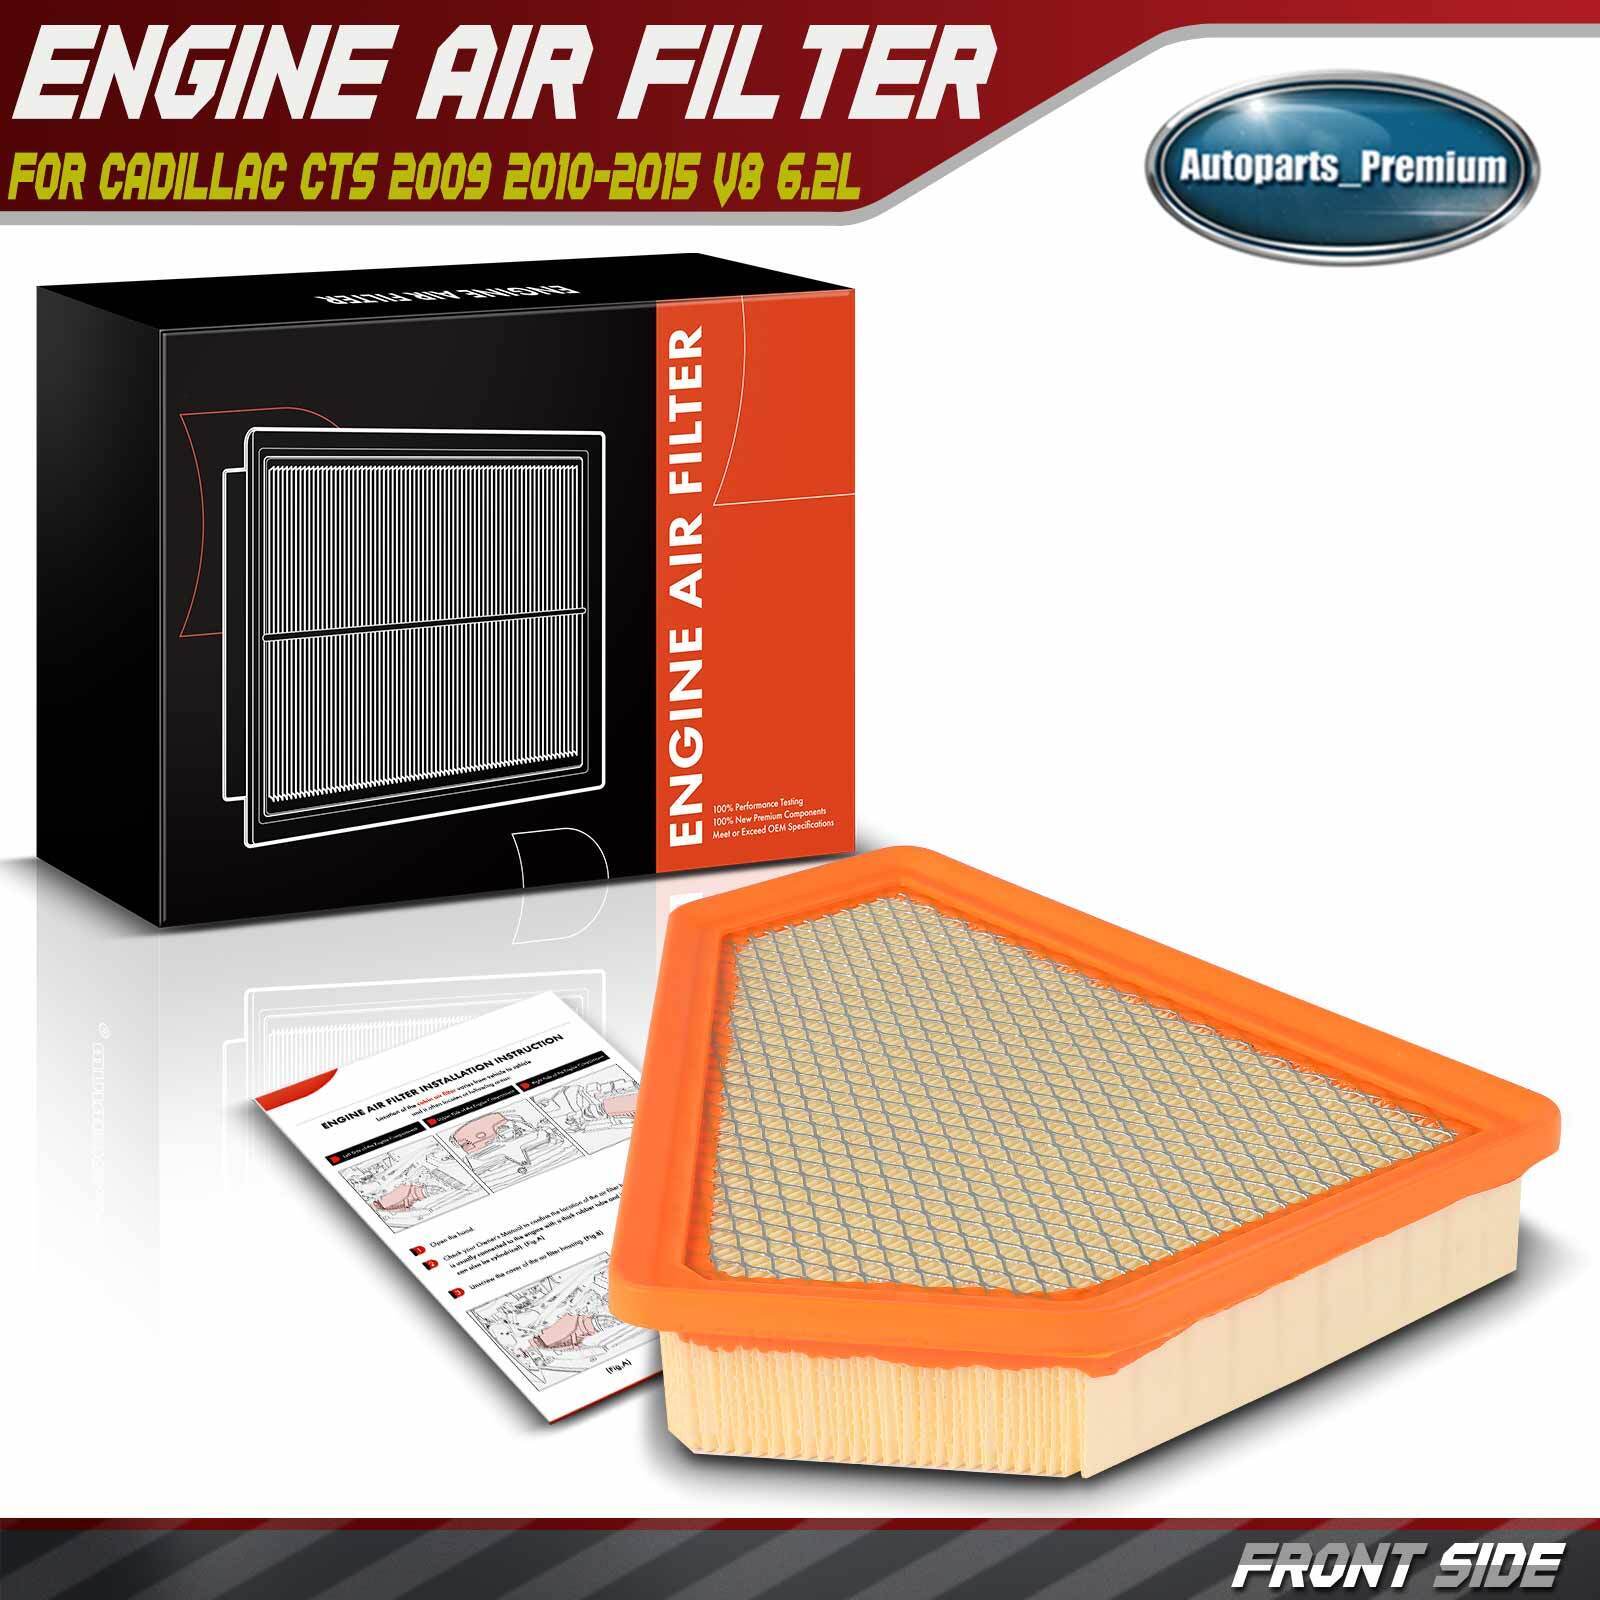 Engine Air Filter for Cadillac CTS 2009 2010 2011-2015 V8 6.2L Flexible Panel